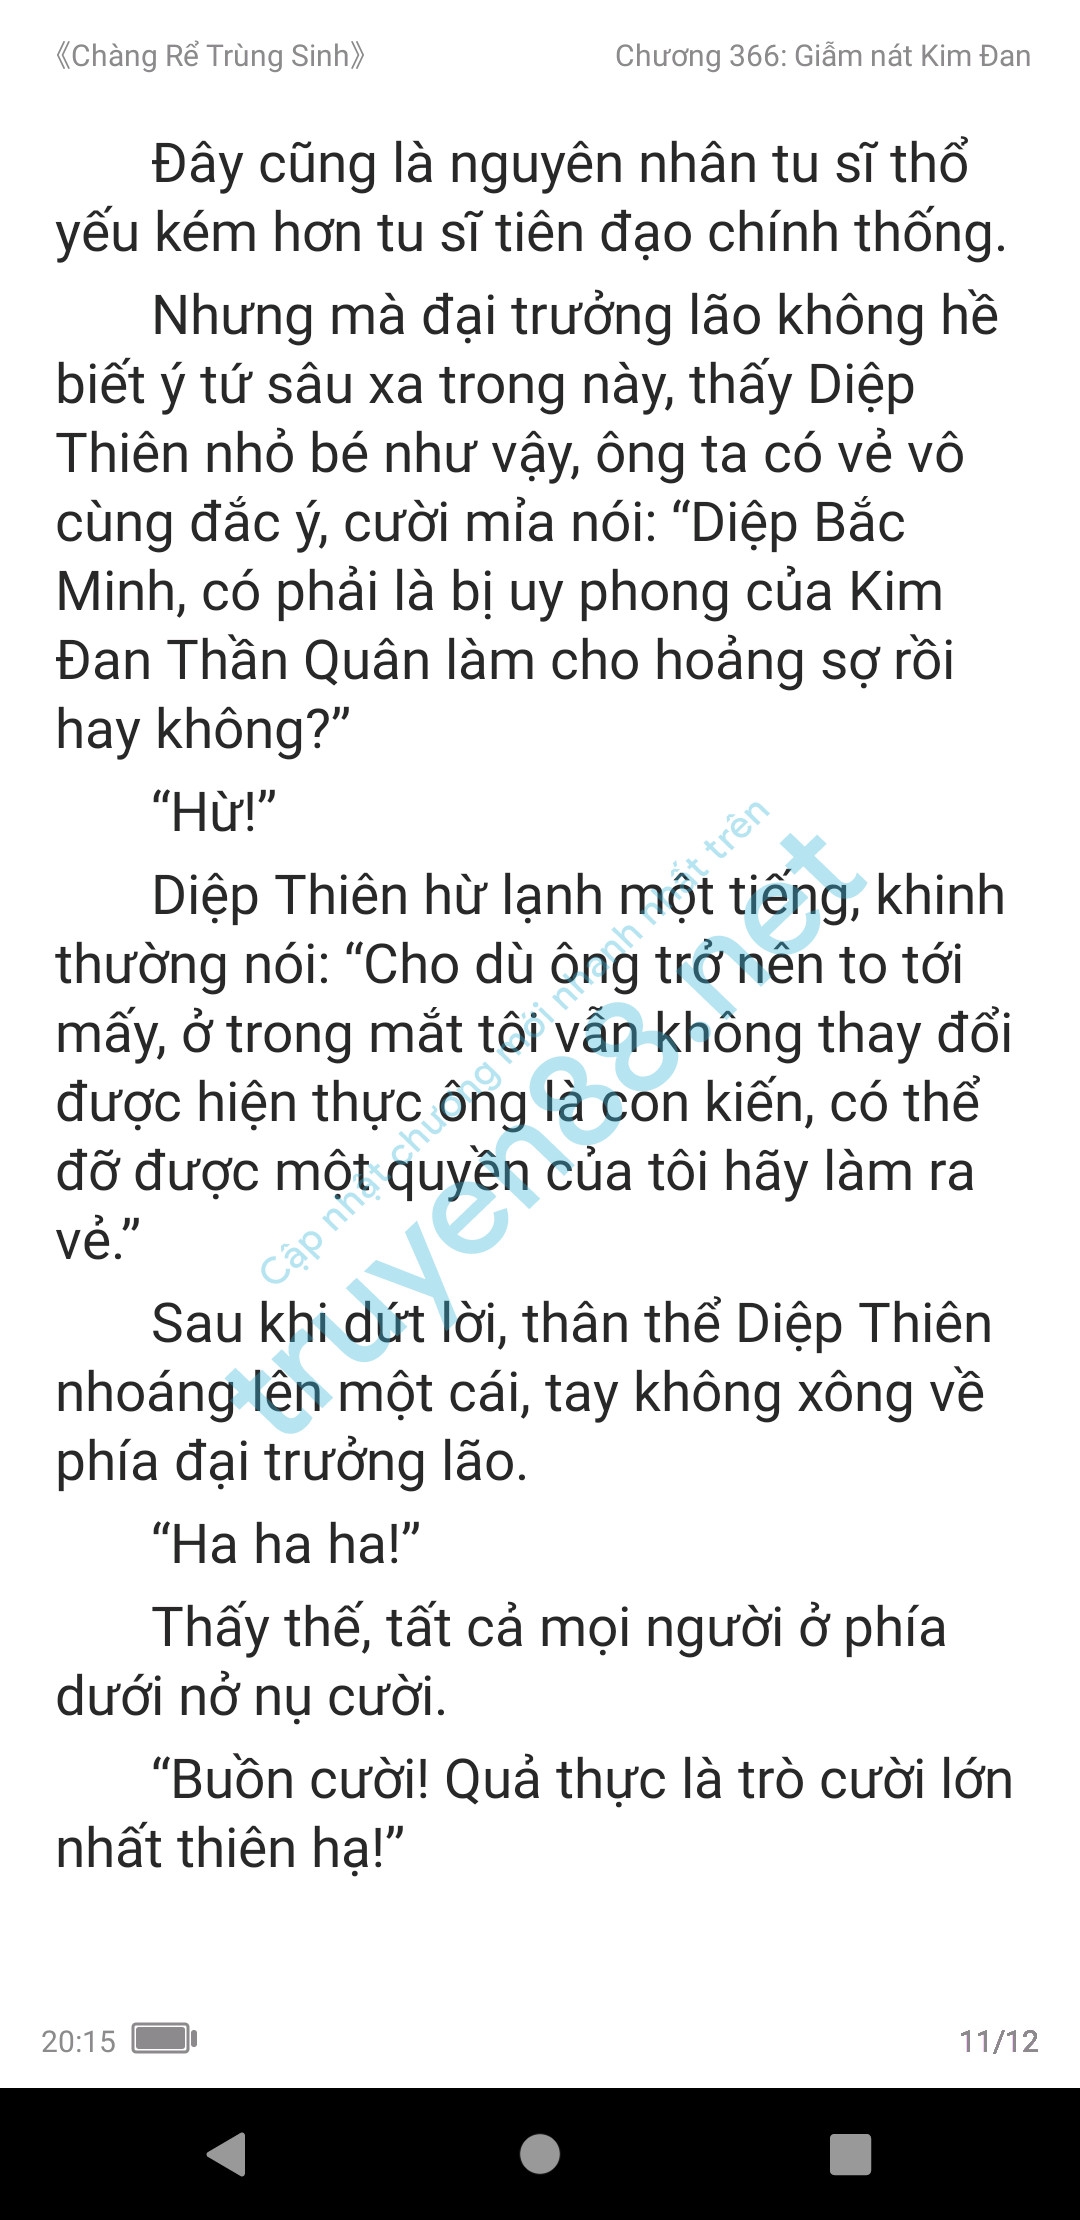 chang-re-trung-sinh-366-0